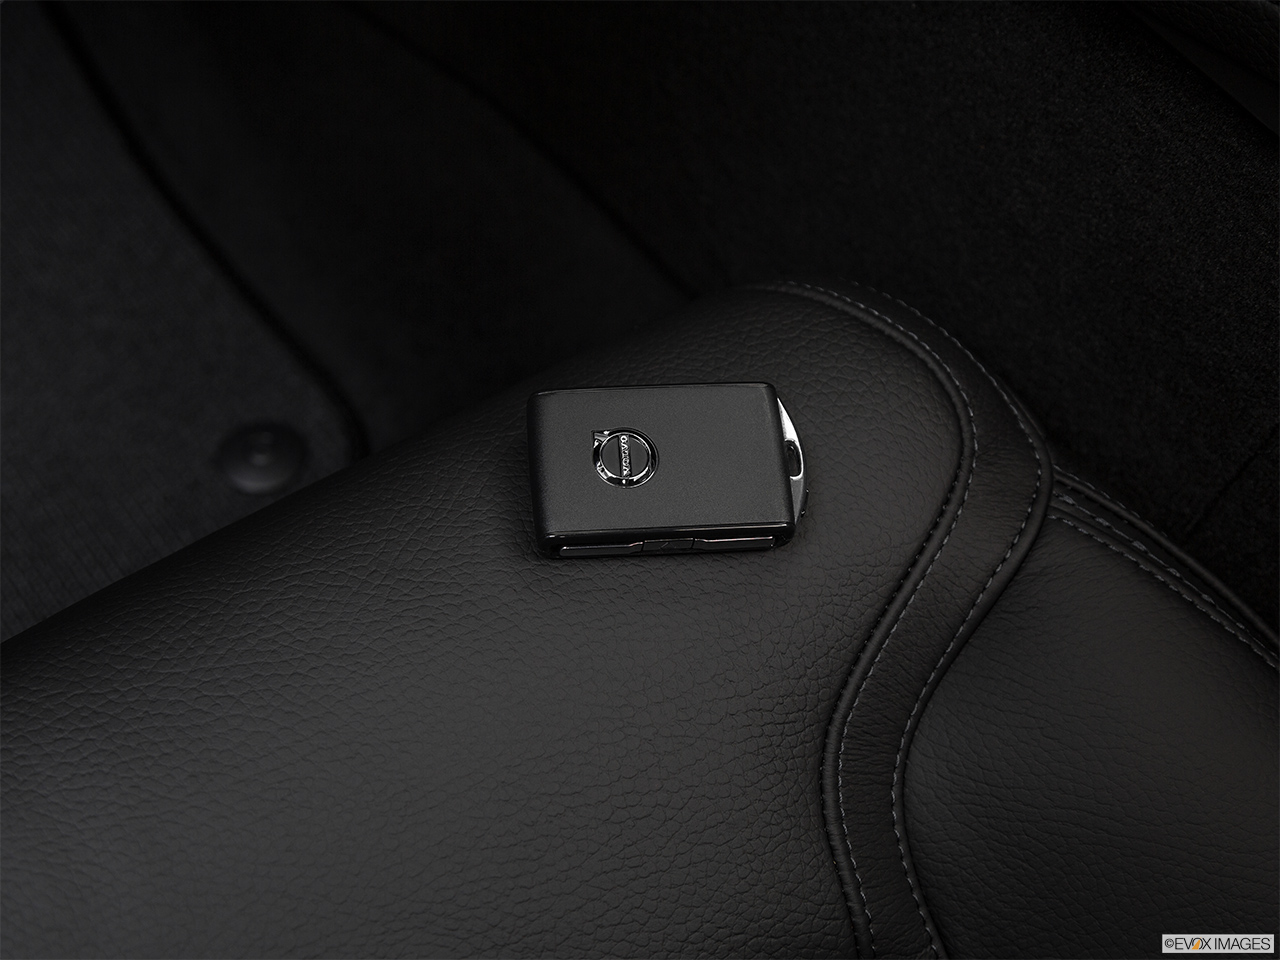 2019 Volvo V90 Cross Country T5 Key fob on driver's seat. 